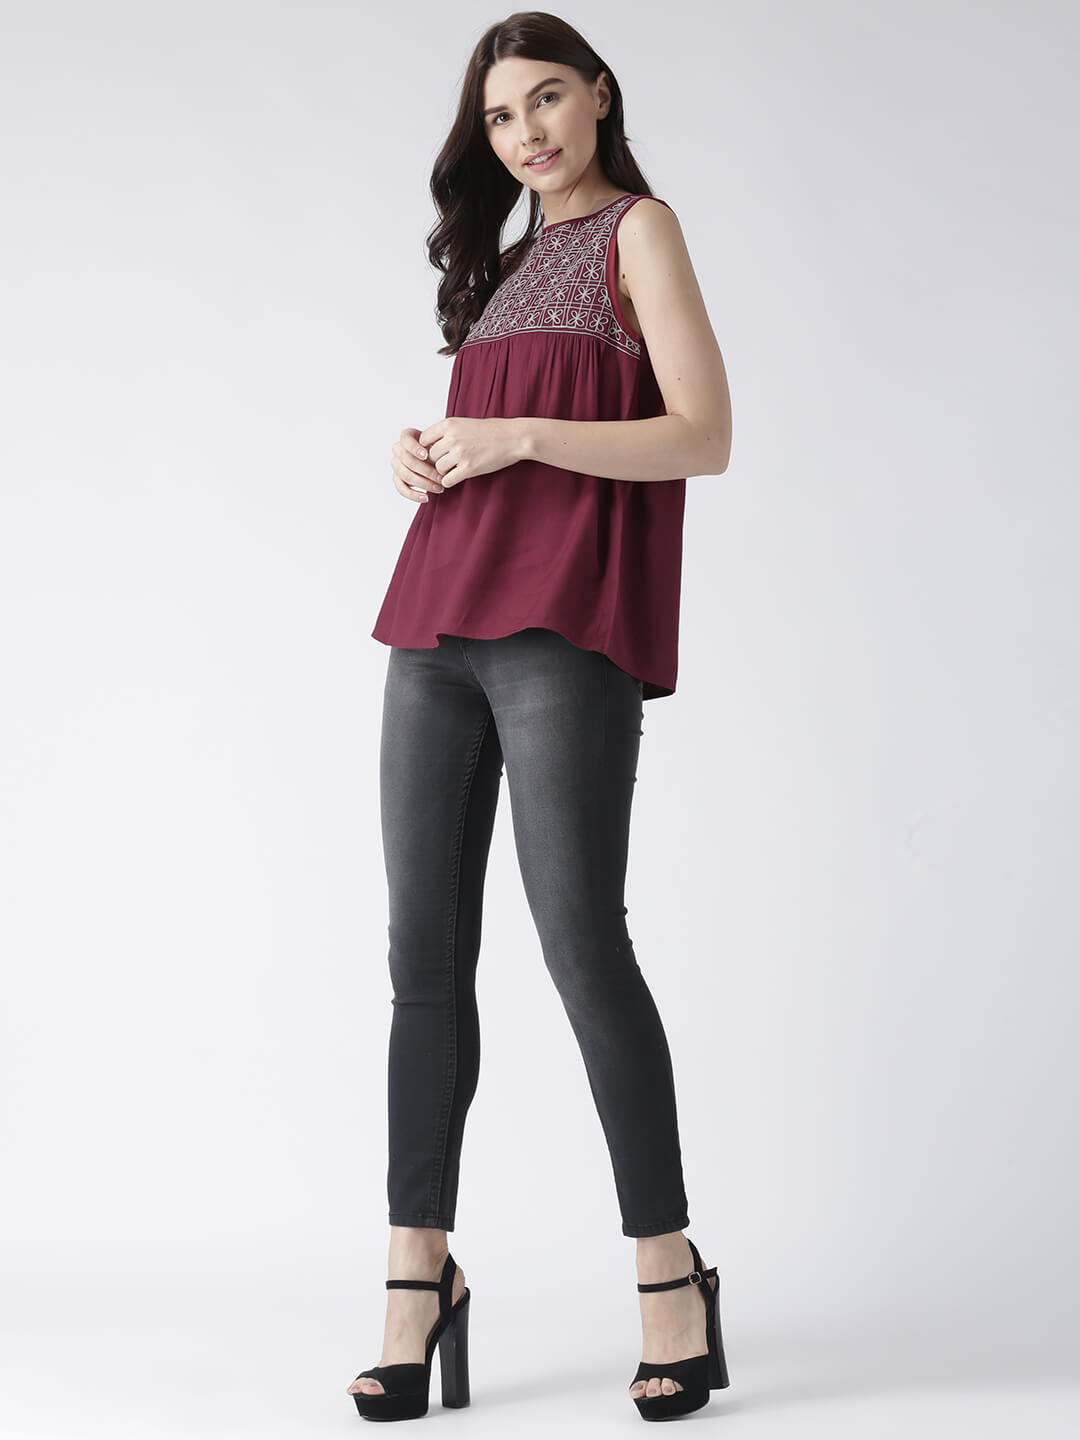 Msfq Women'S Sleeveless Maroon Top With Embroidered Yoke